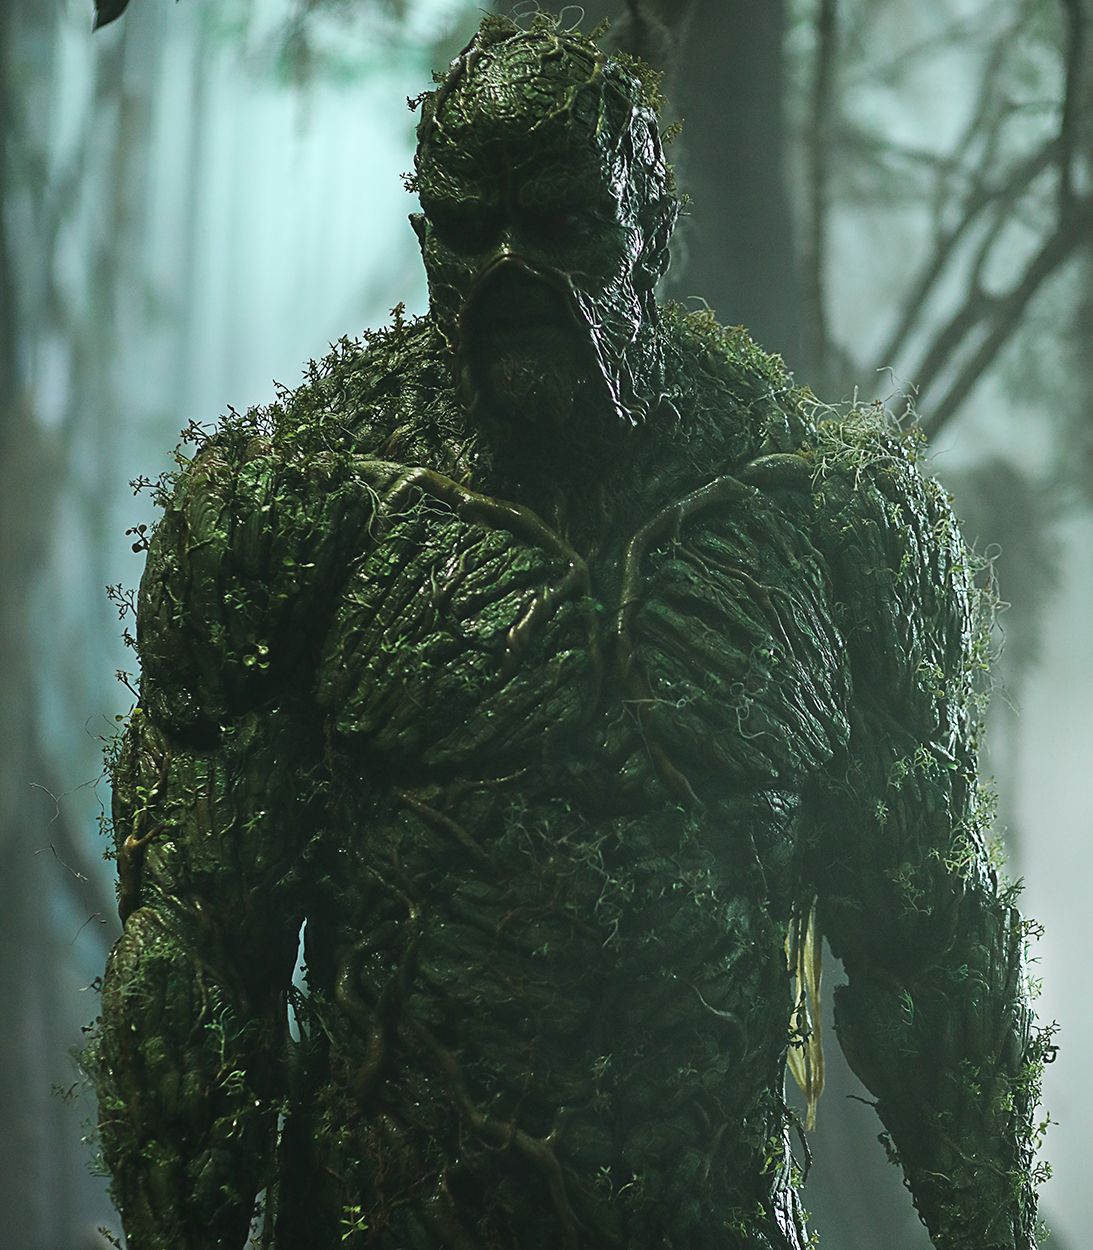 Swamp Thing in Episode 5 vertical